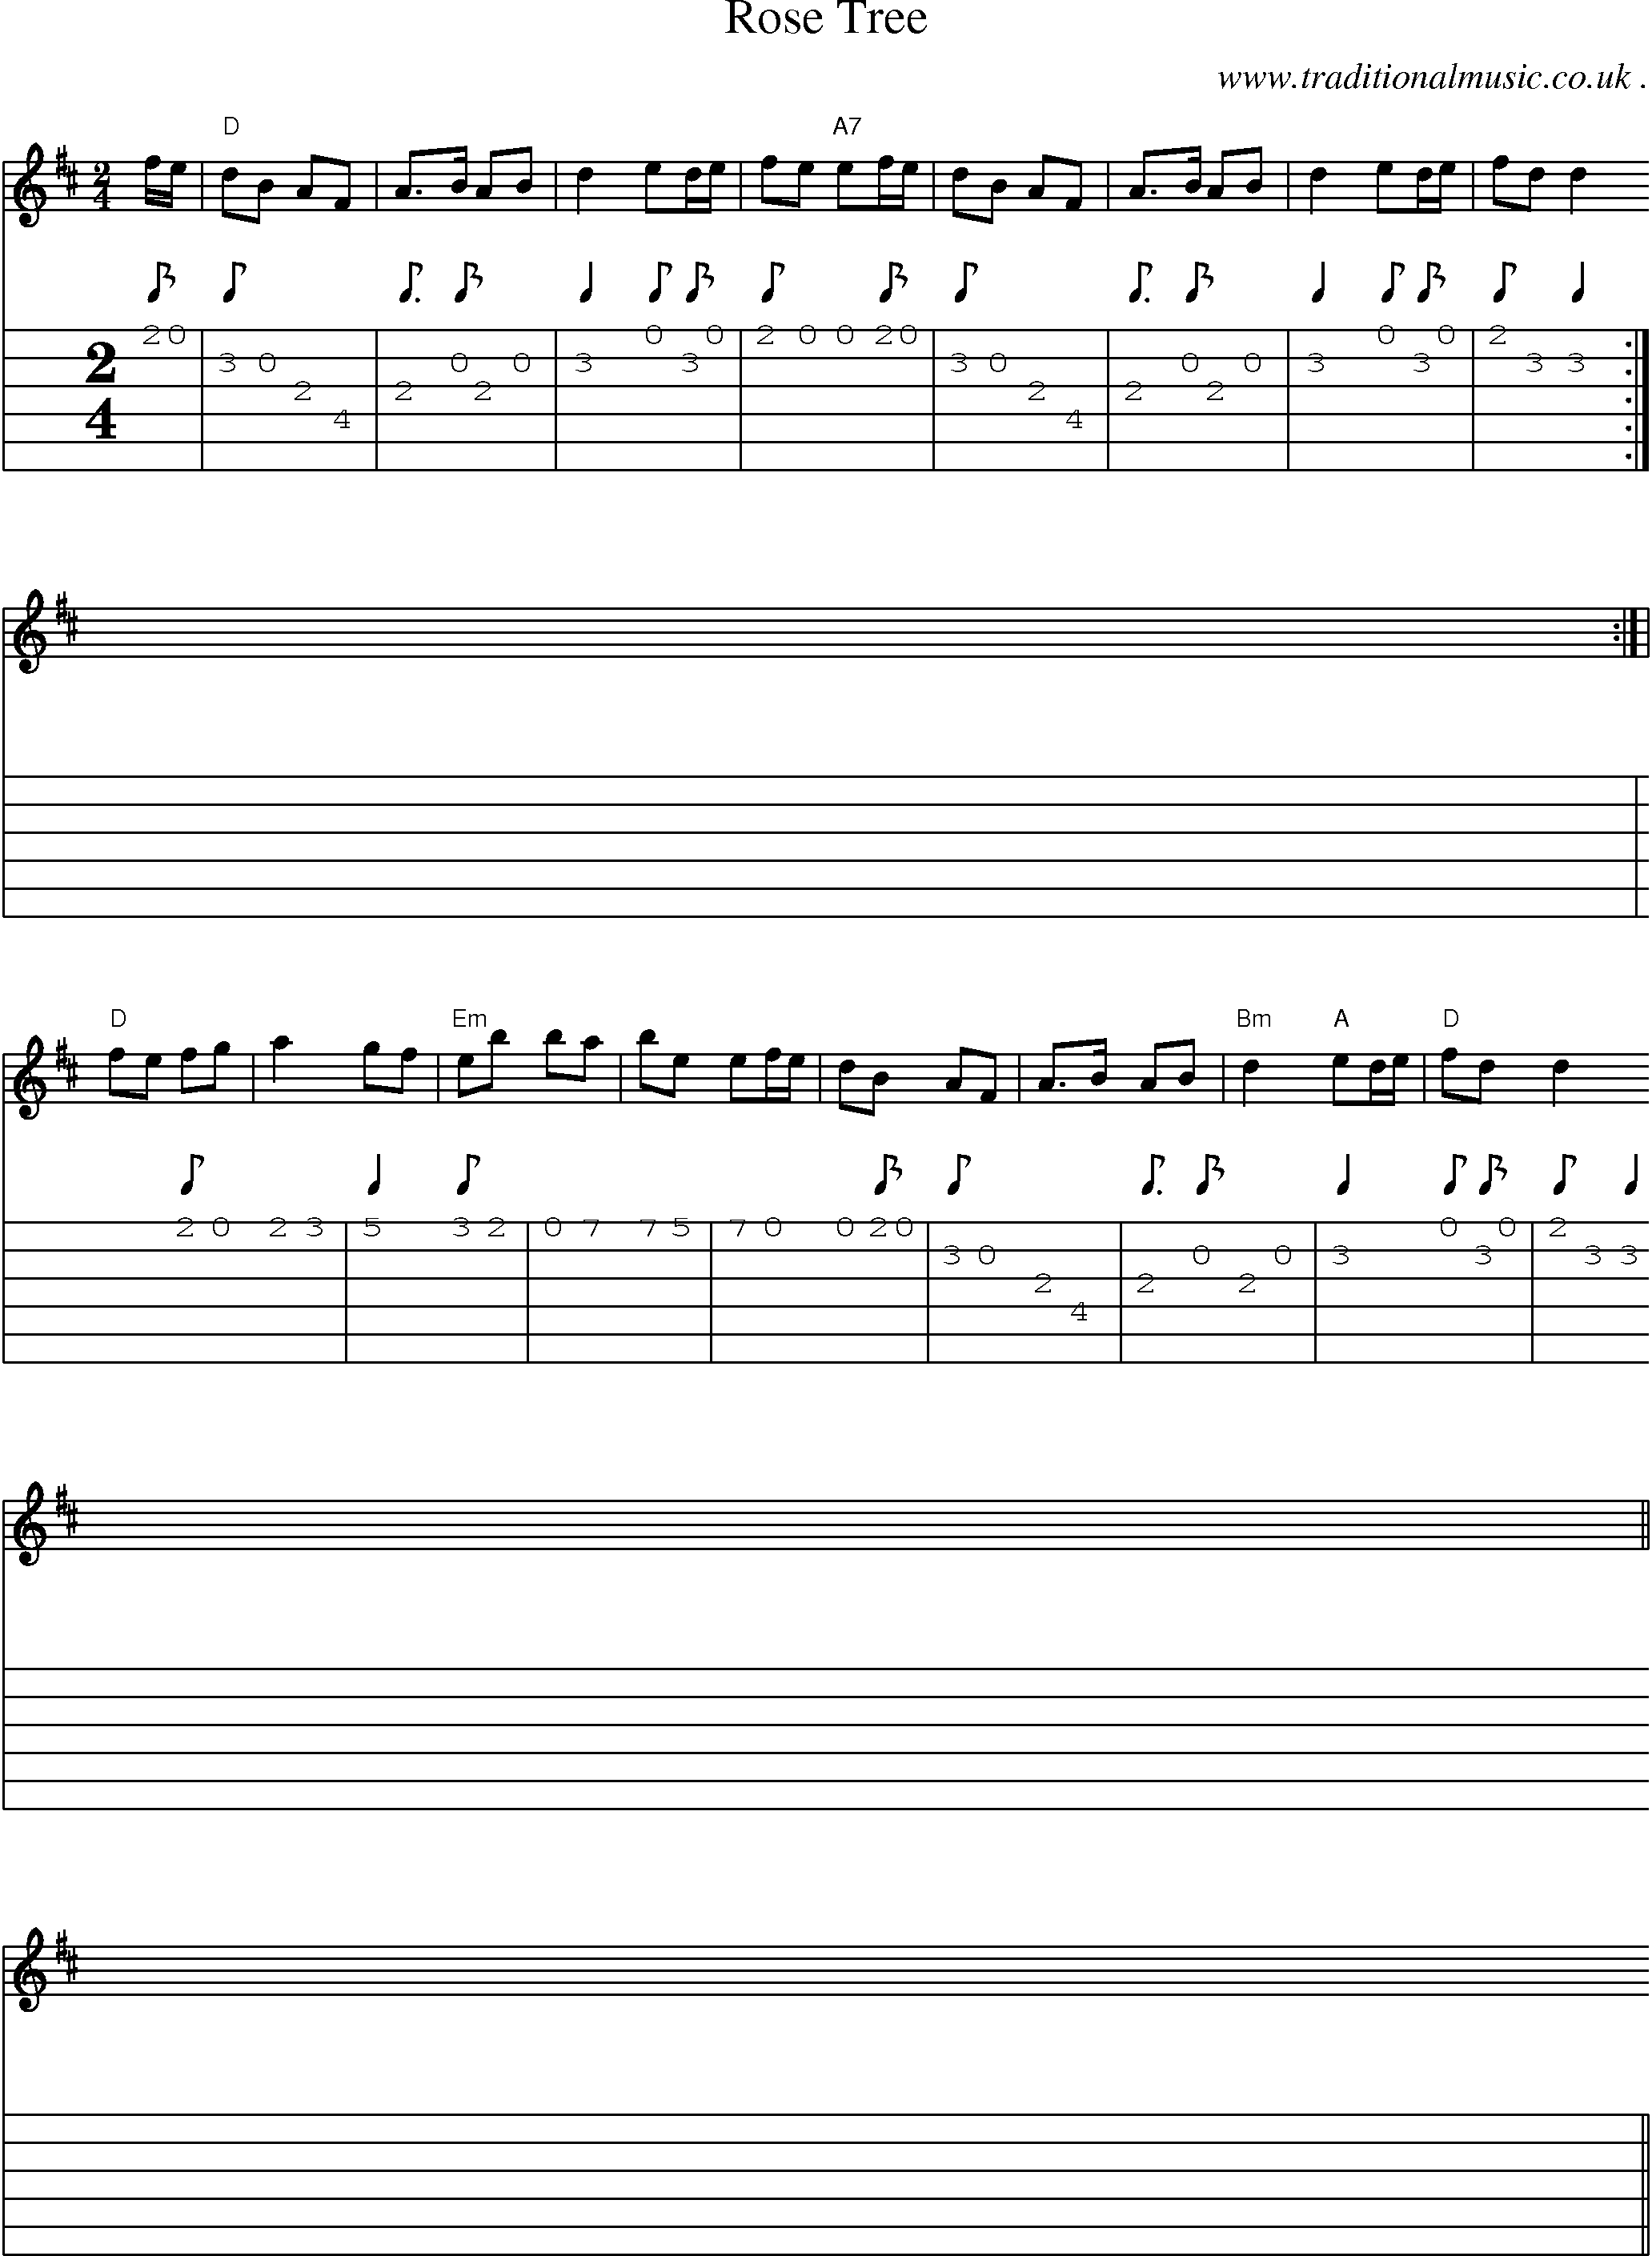 Sheet-music  score, Chords and Guitar Tabs for Rose Tree